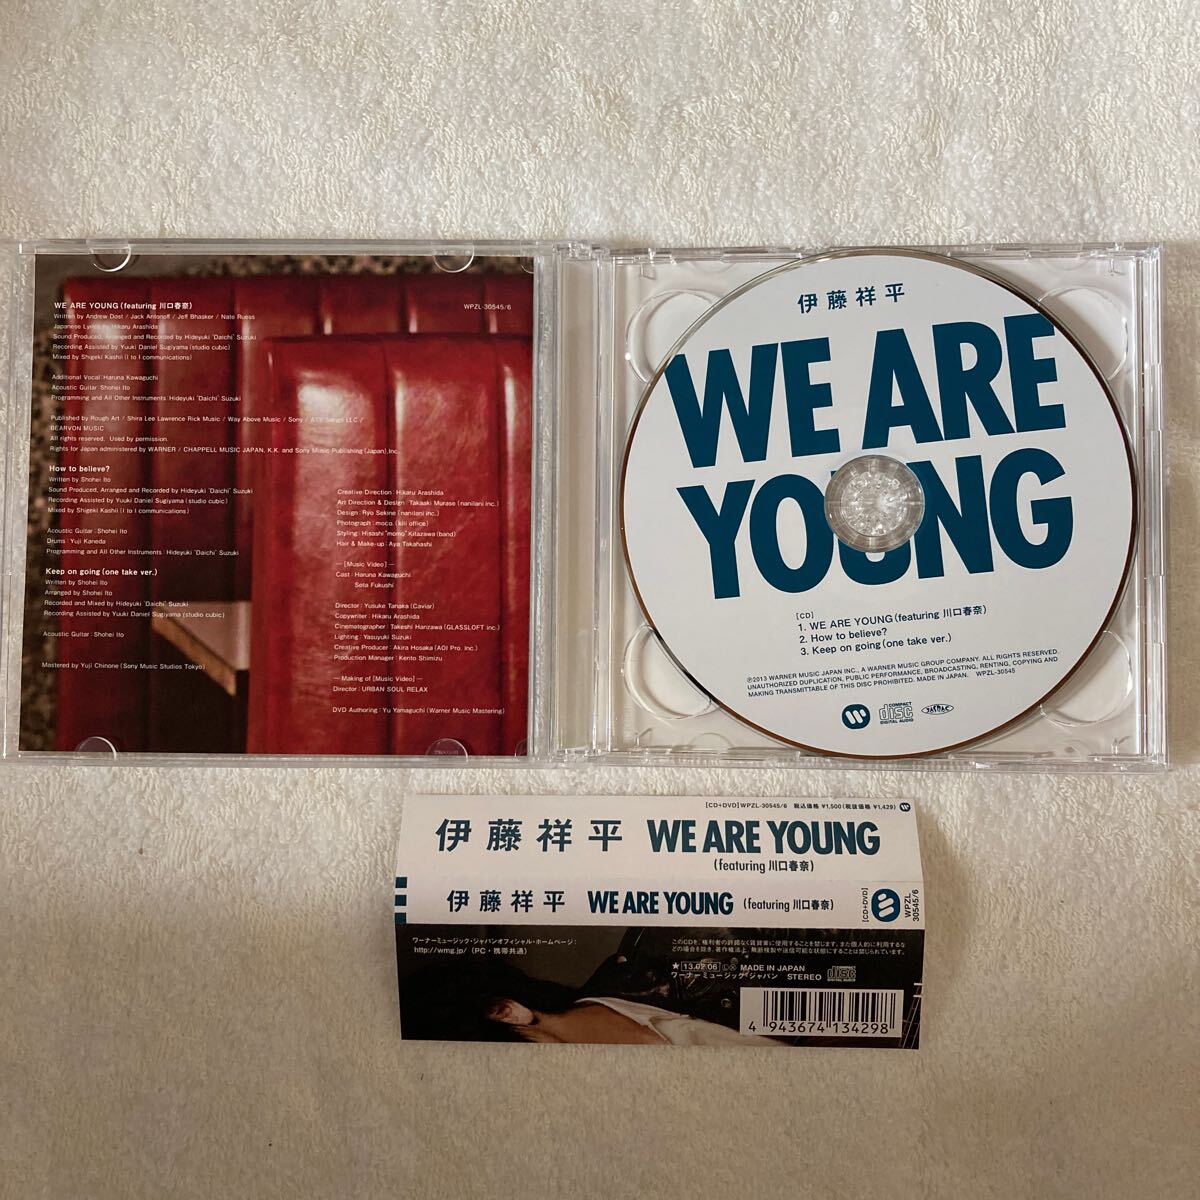 n 2061 伊藤祥平■【WE ARE YOUNG(featuring 川口春奈)】初回限定盤CD +DVD _画像3